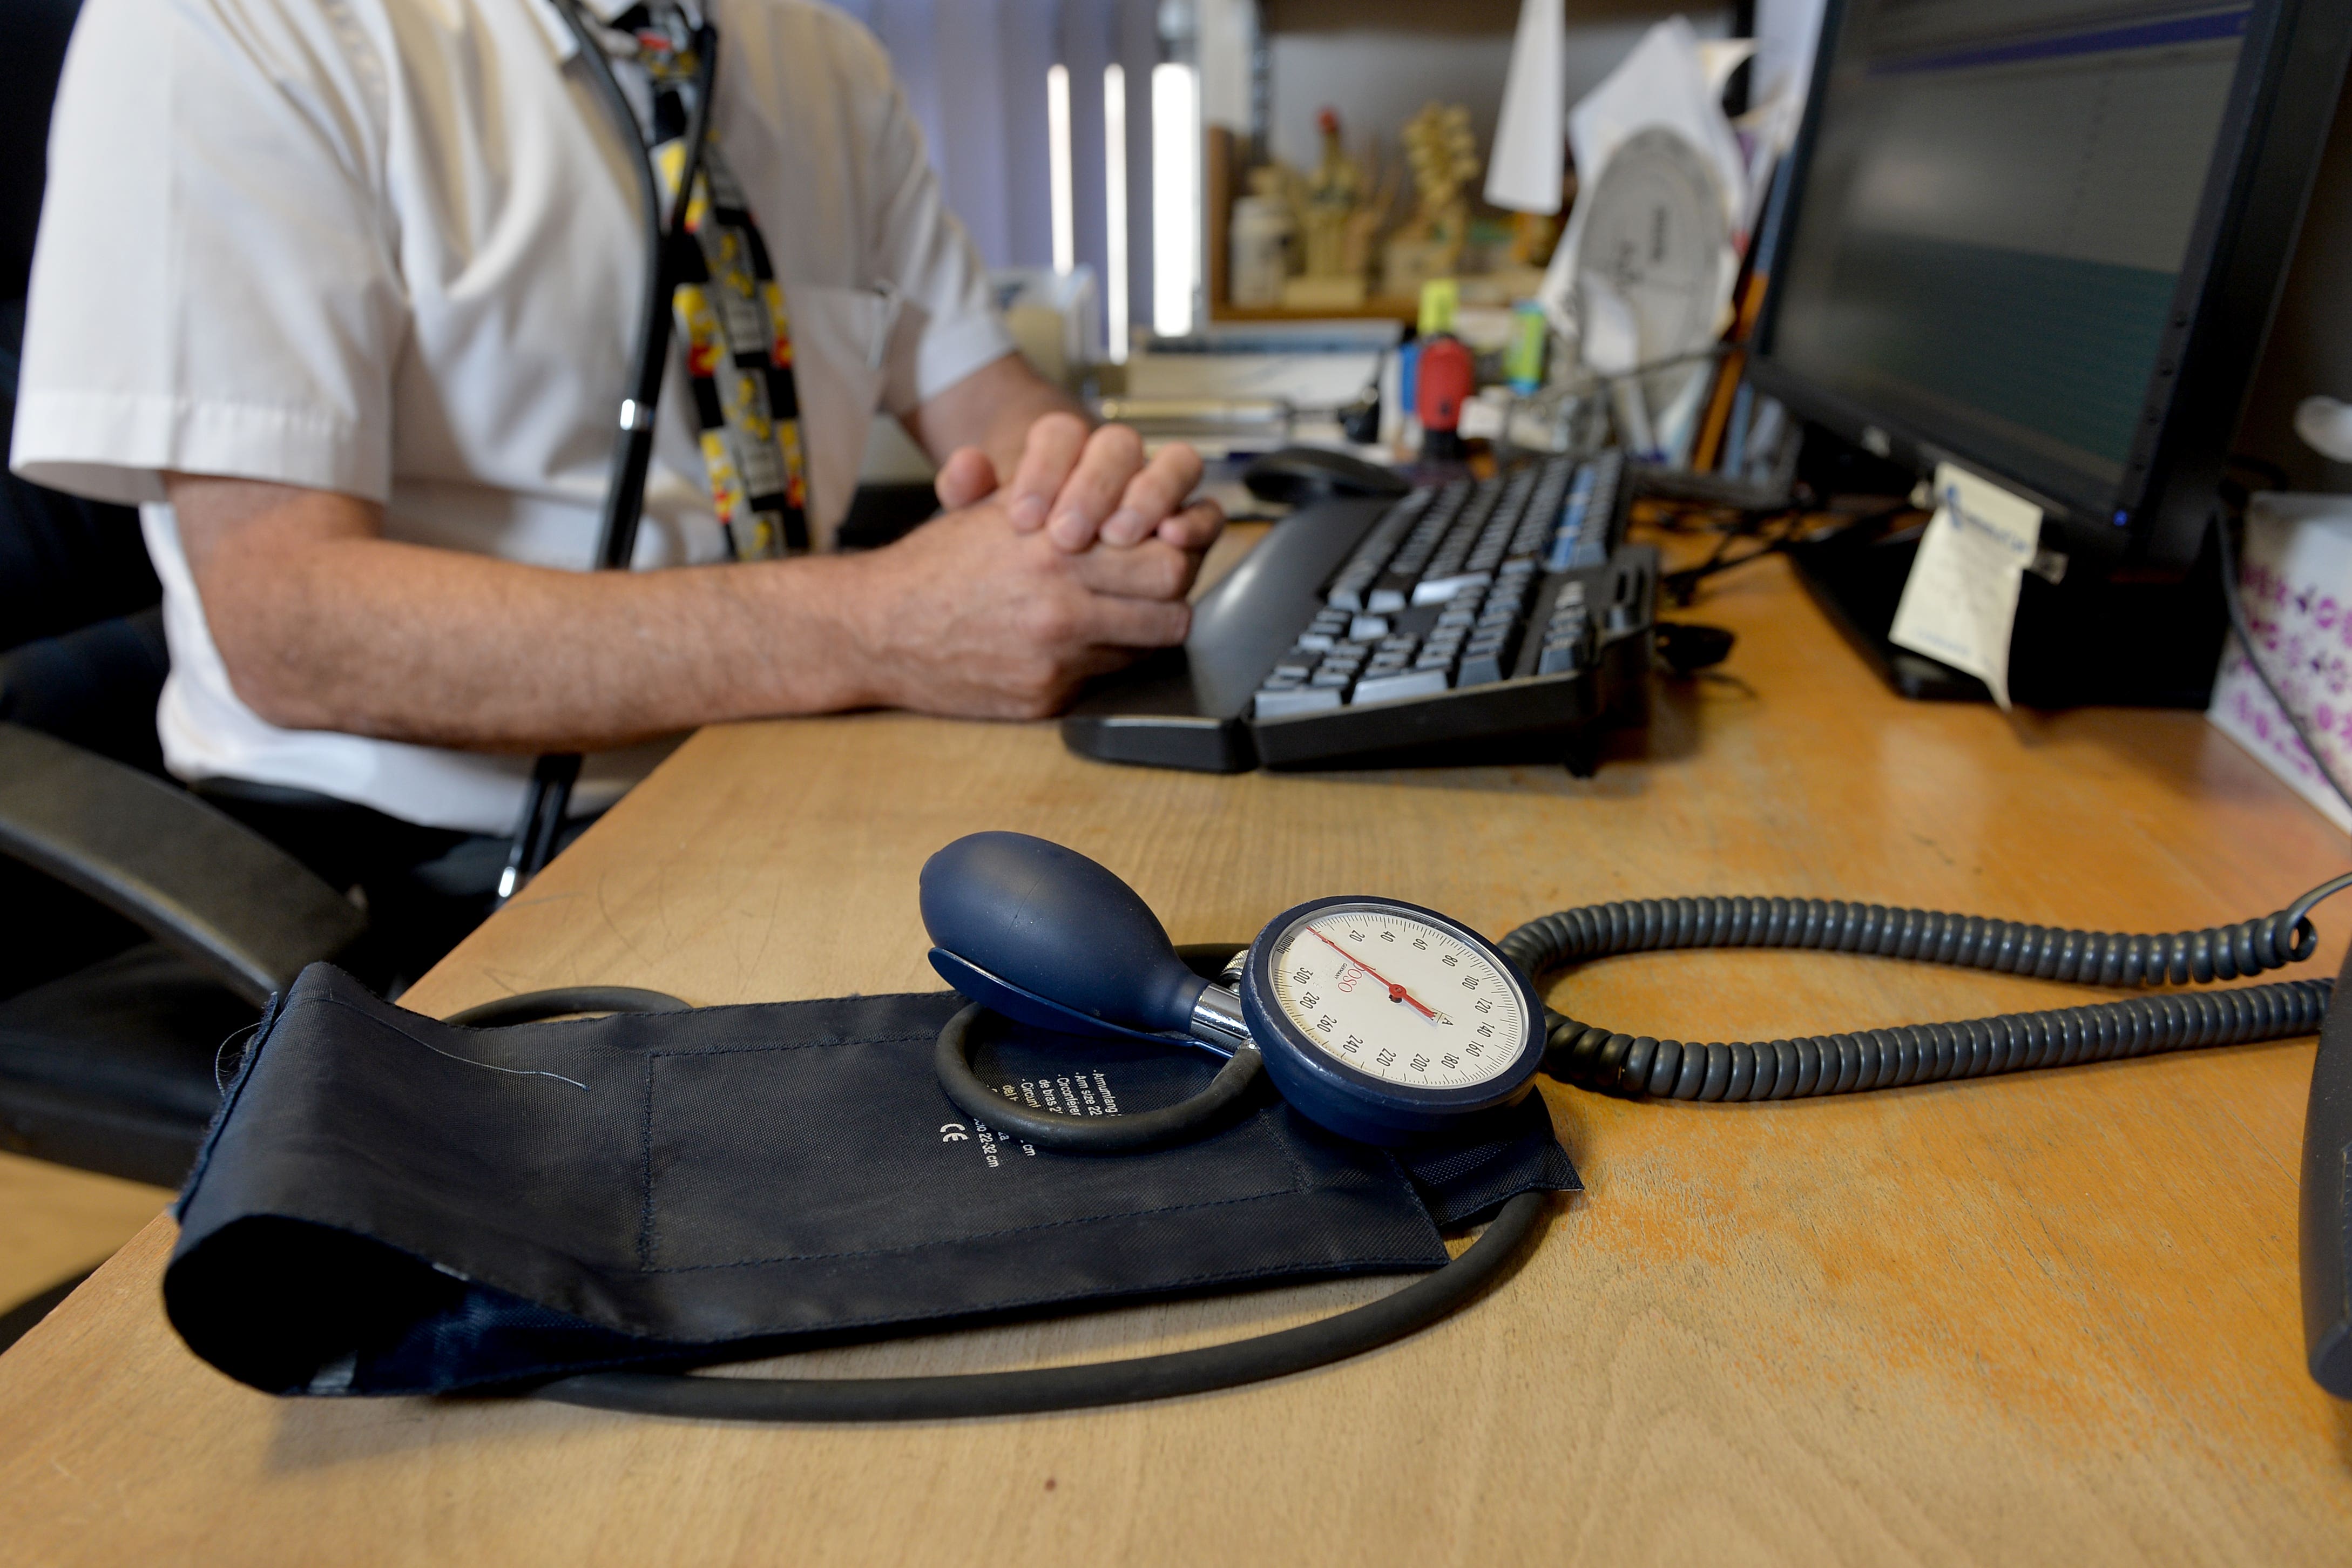 A new report from the British Medical Association (BMA) said medics are struggling to cope with demand from patients whose health conditions are being made worse by poverty (Anthony Devlin/PA)